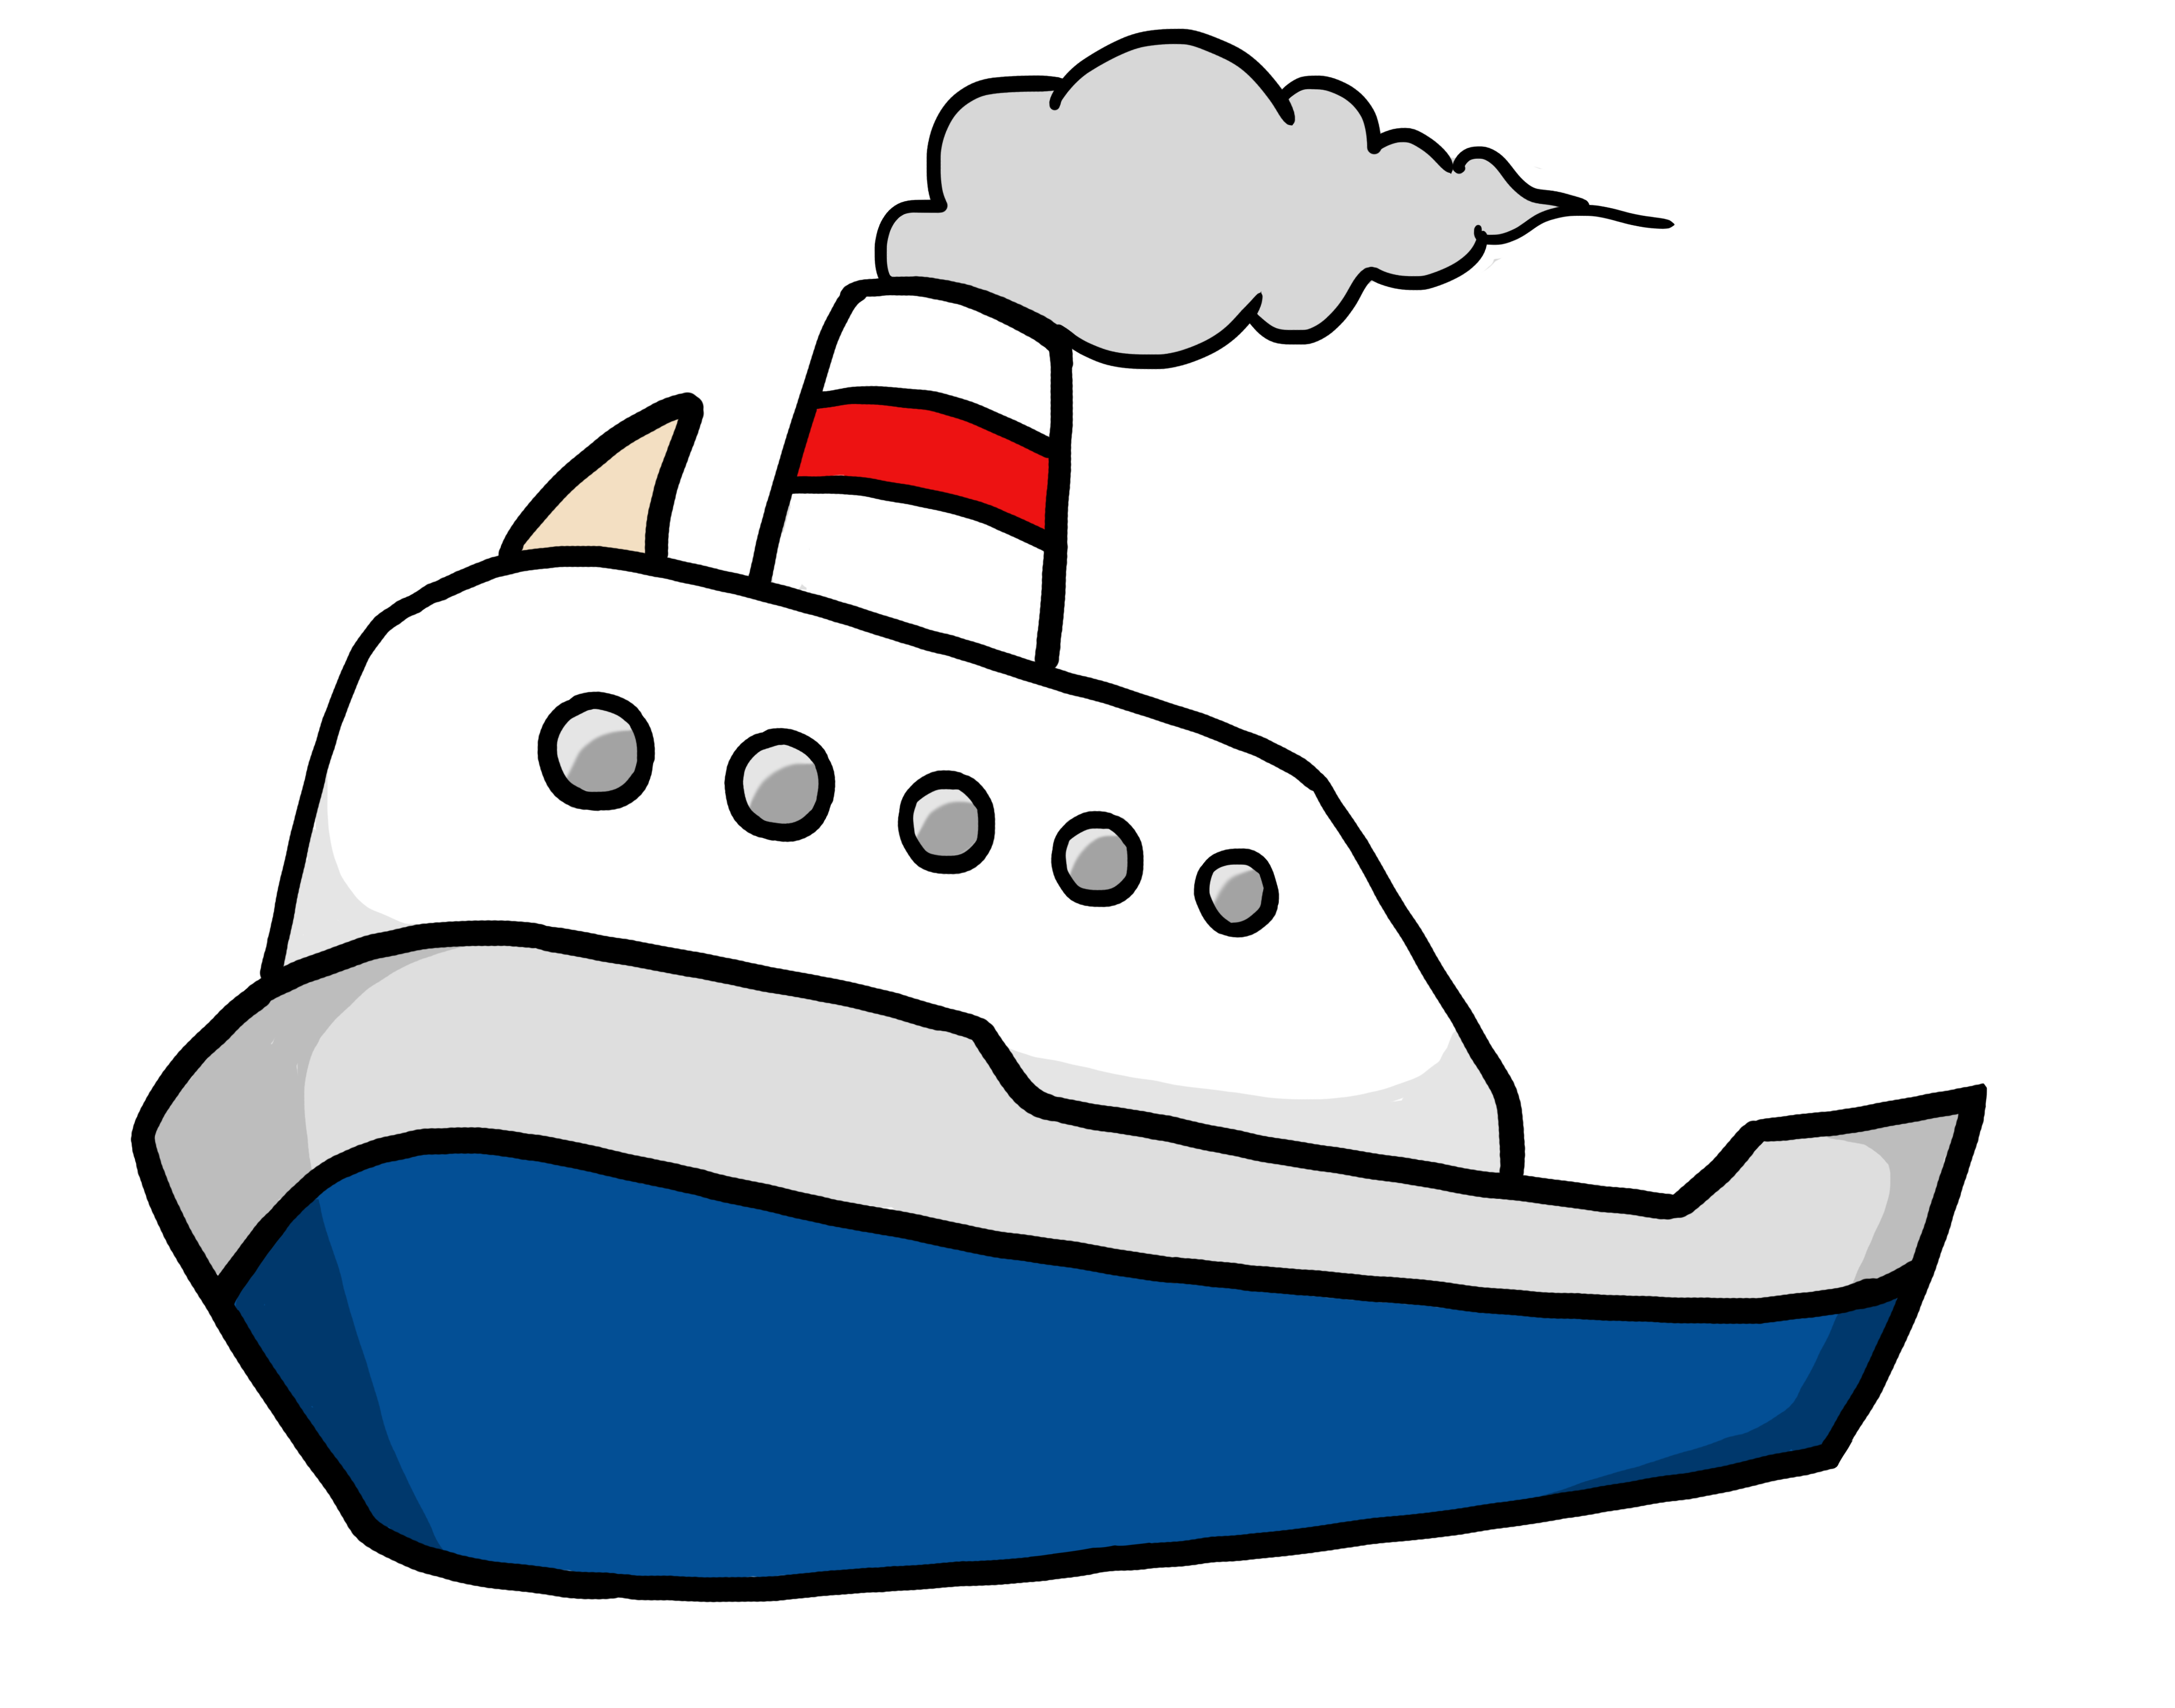 clipart of a ship - photo #3